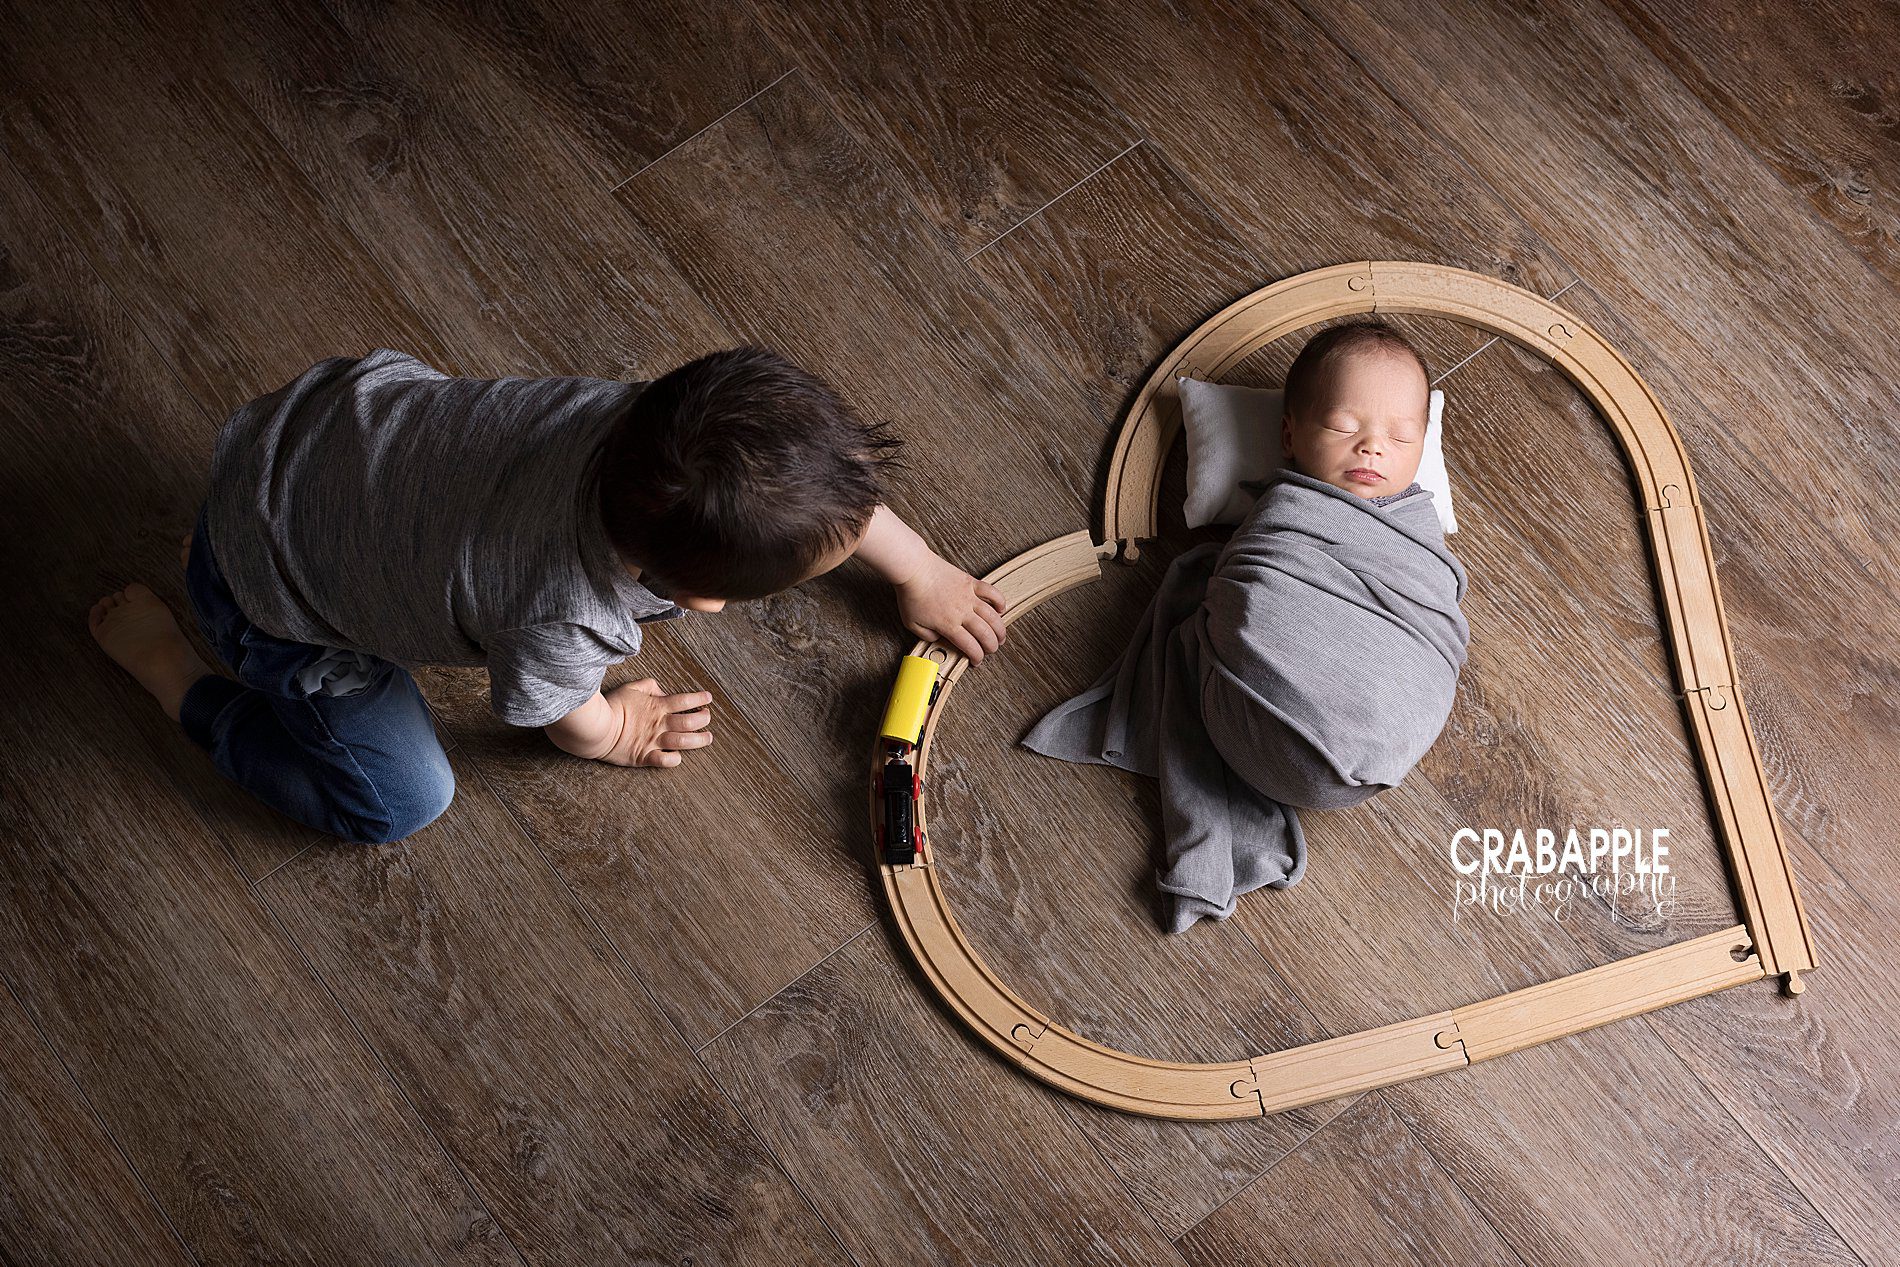 fun prop and pose ideas for newborn photos with older sibling